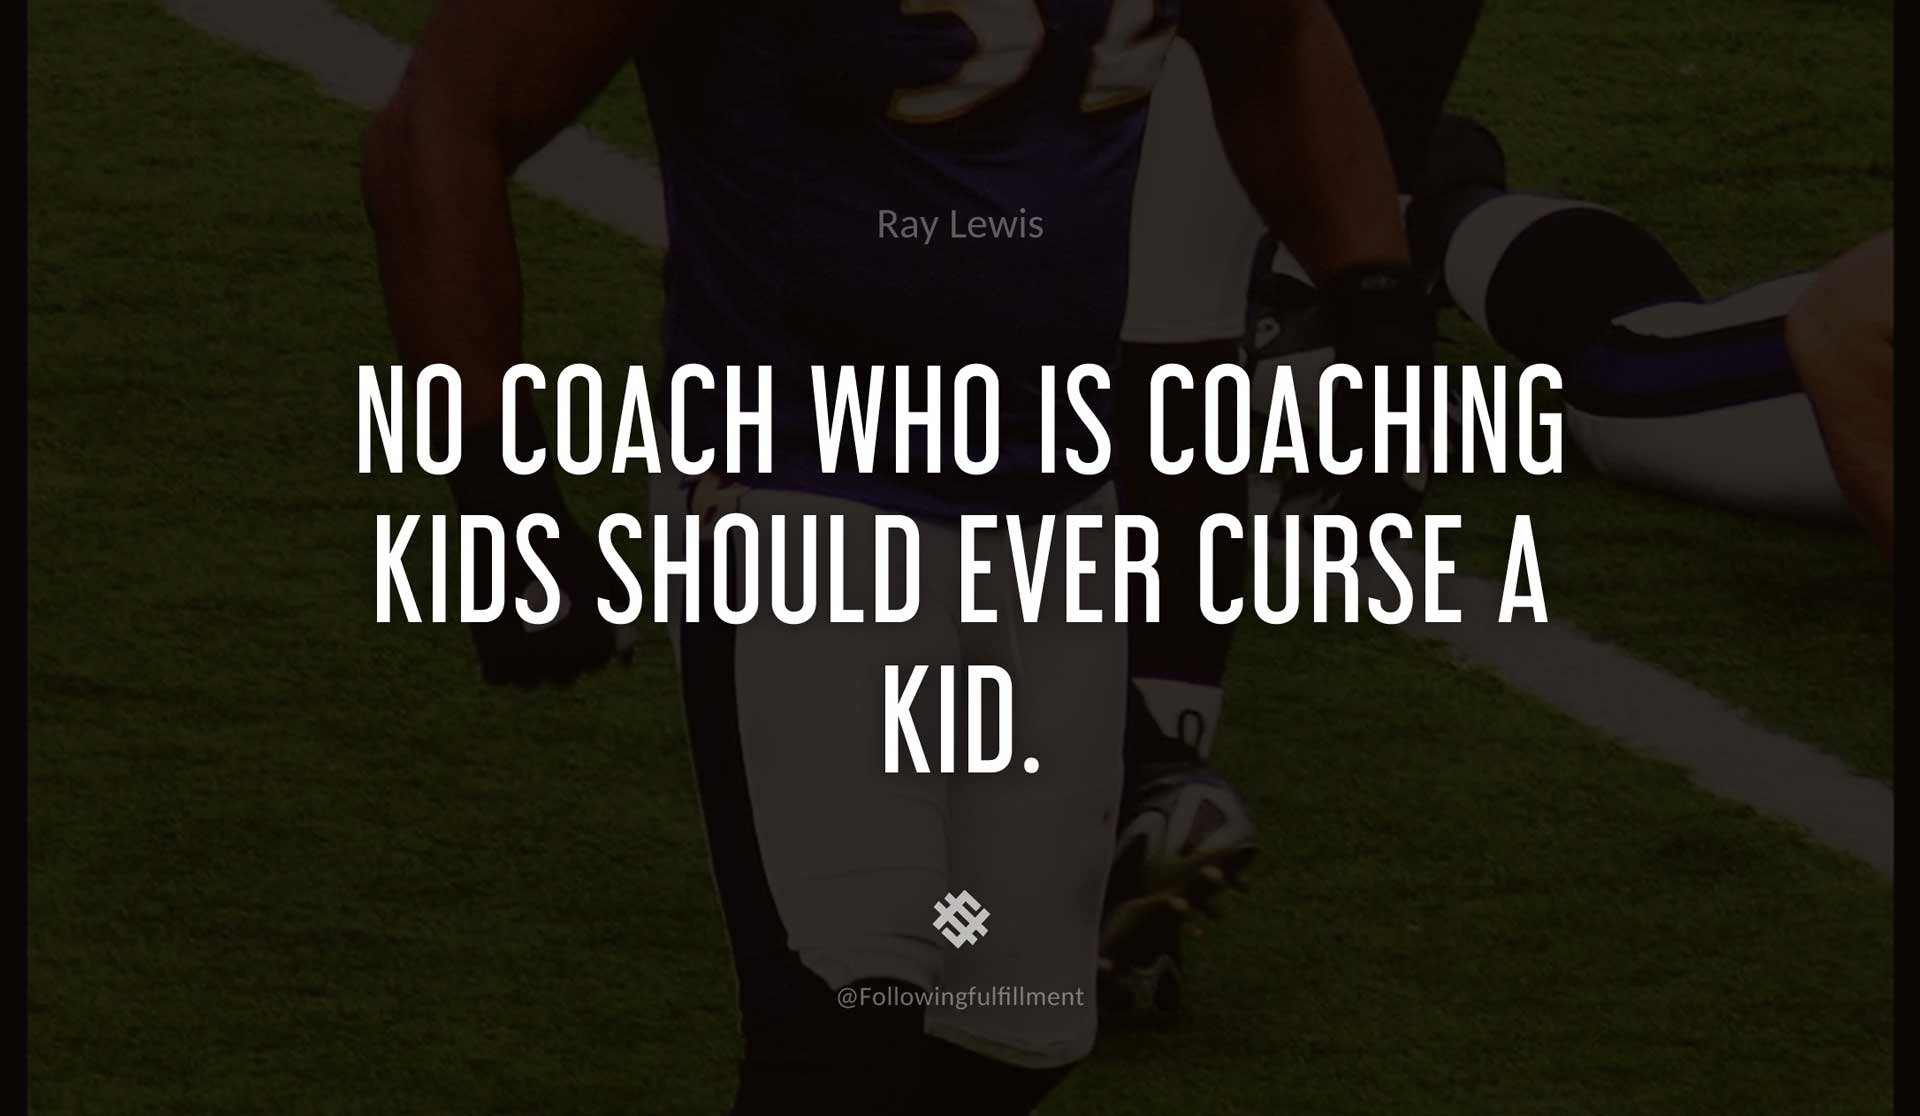 No-coach-who-is-coaching-kids-should-ever-curse-a-kid.-RAY-LEWIS-Quote.jpg